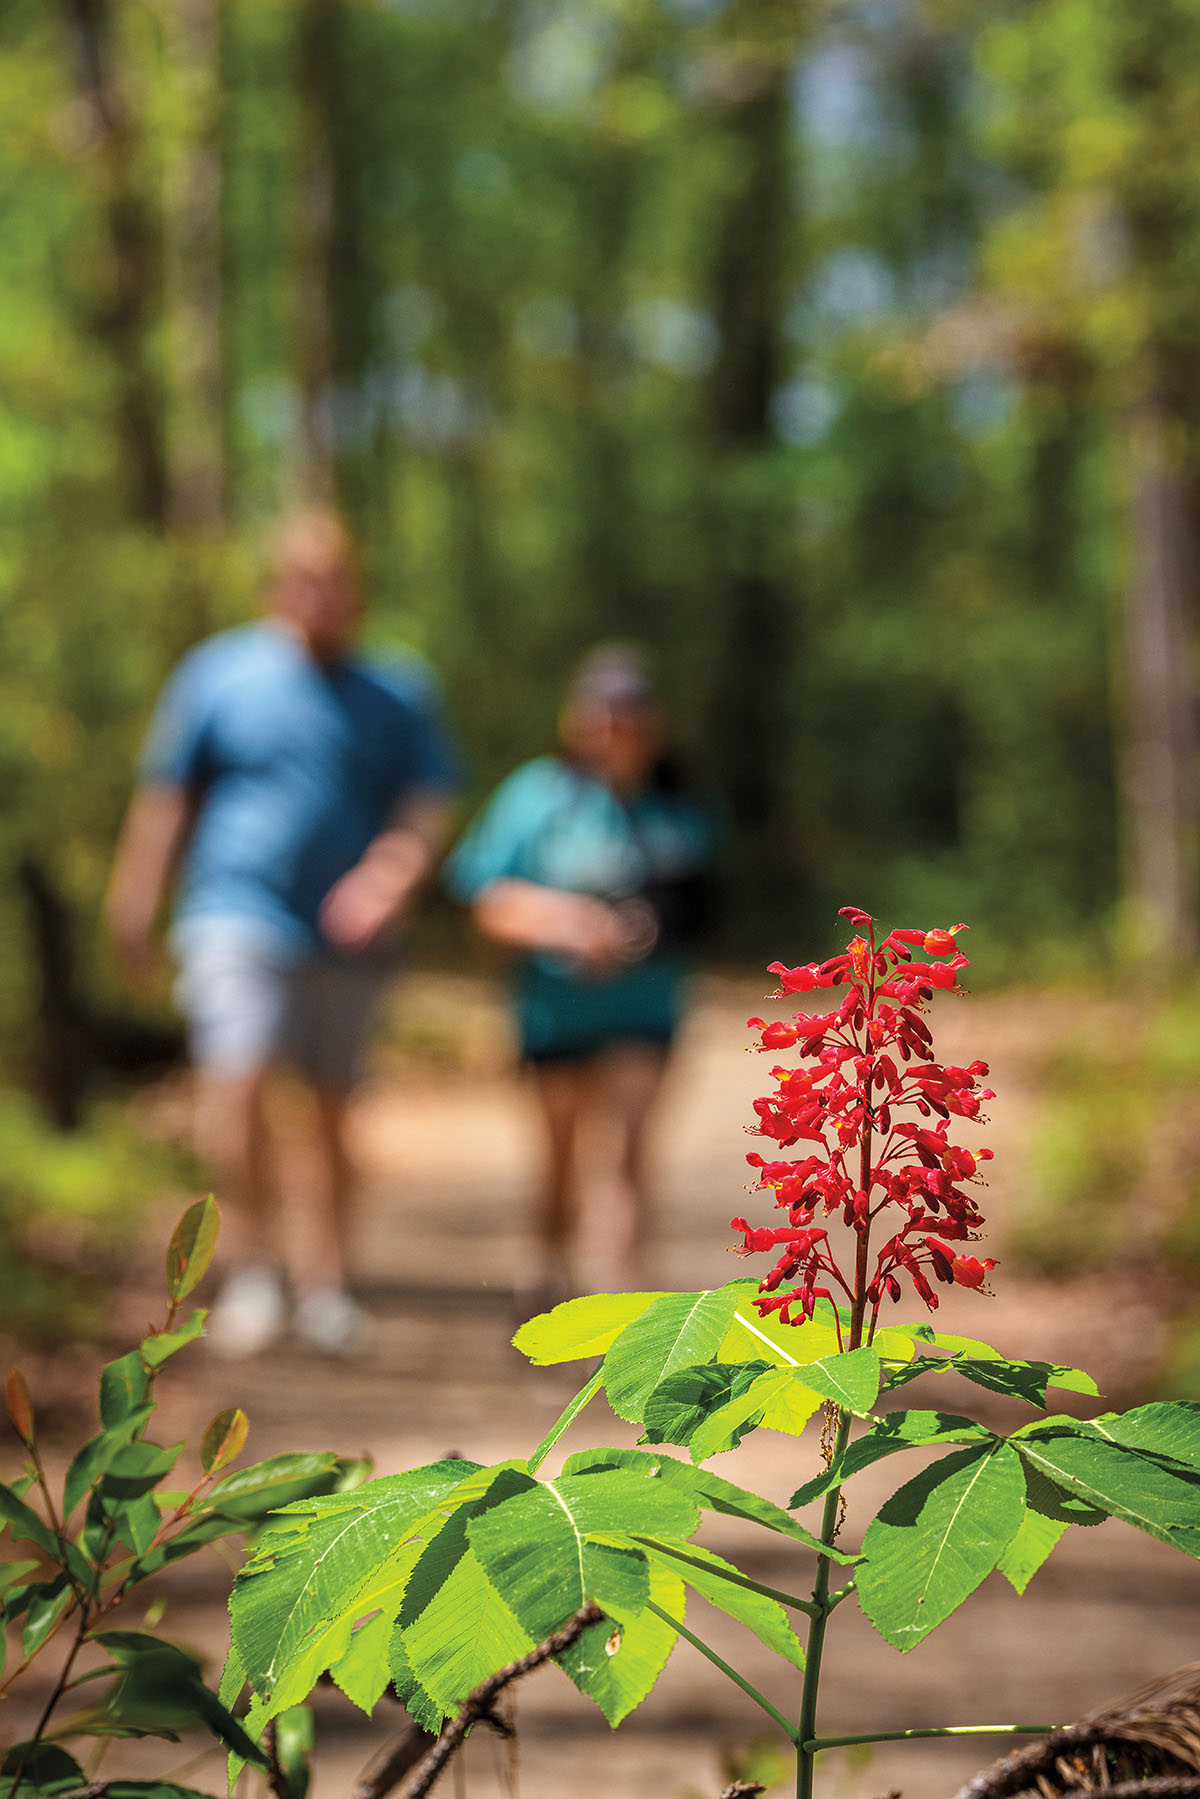 A lone red flower with a long green stem is in the foreground, people walk on a trail in a wooded area in the background